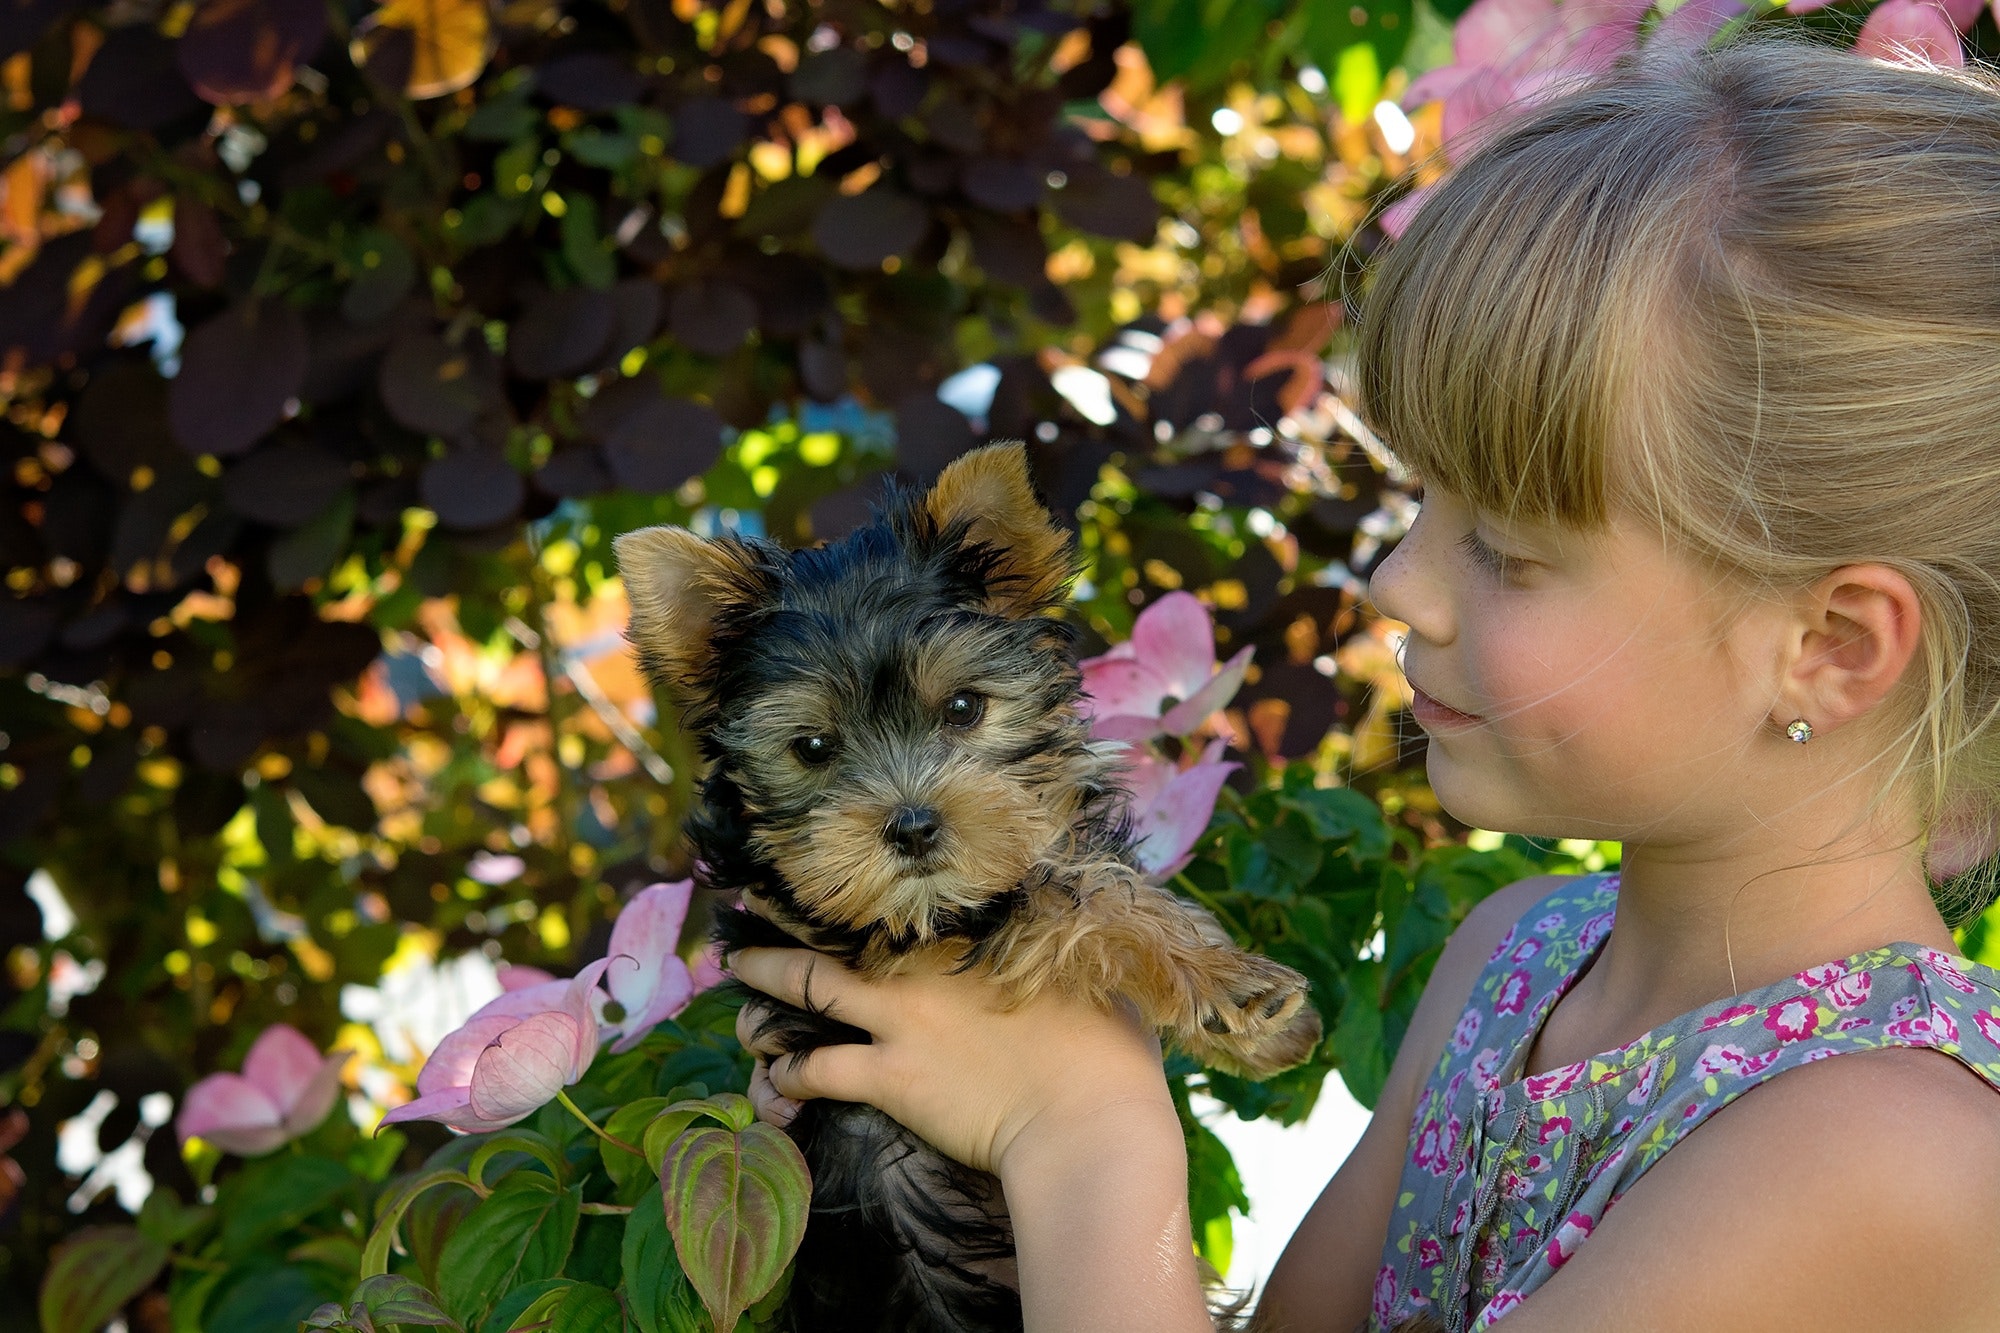 Girl Holding Black and Brown Short Coated Dog, Adorable, Child, Cute, Dog, HQ Photo